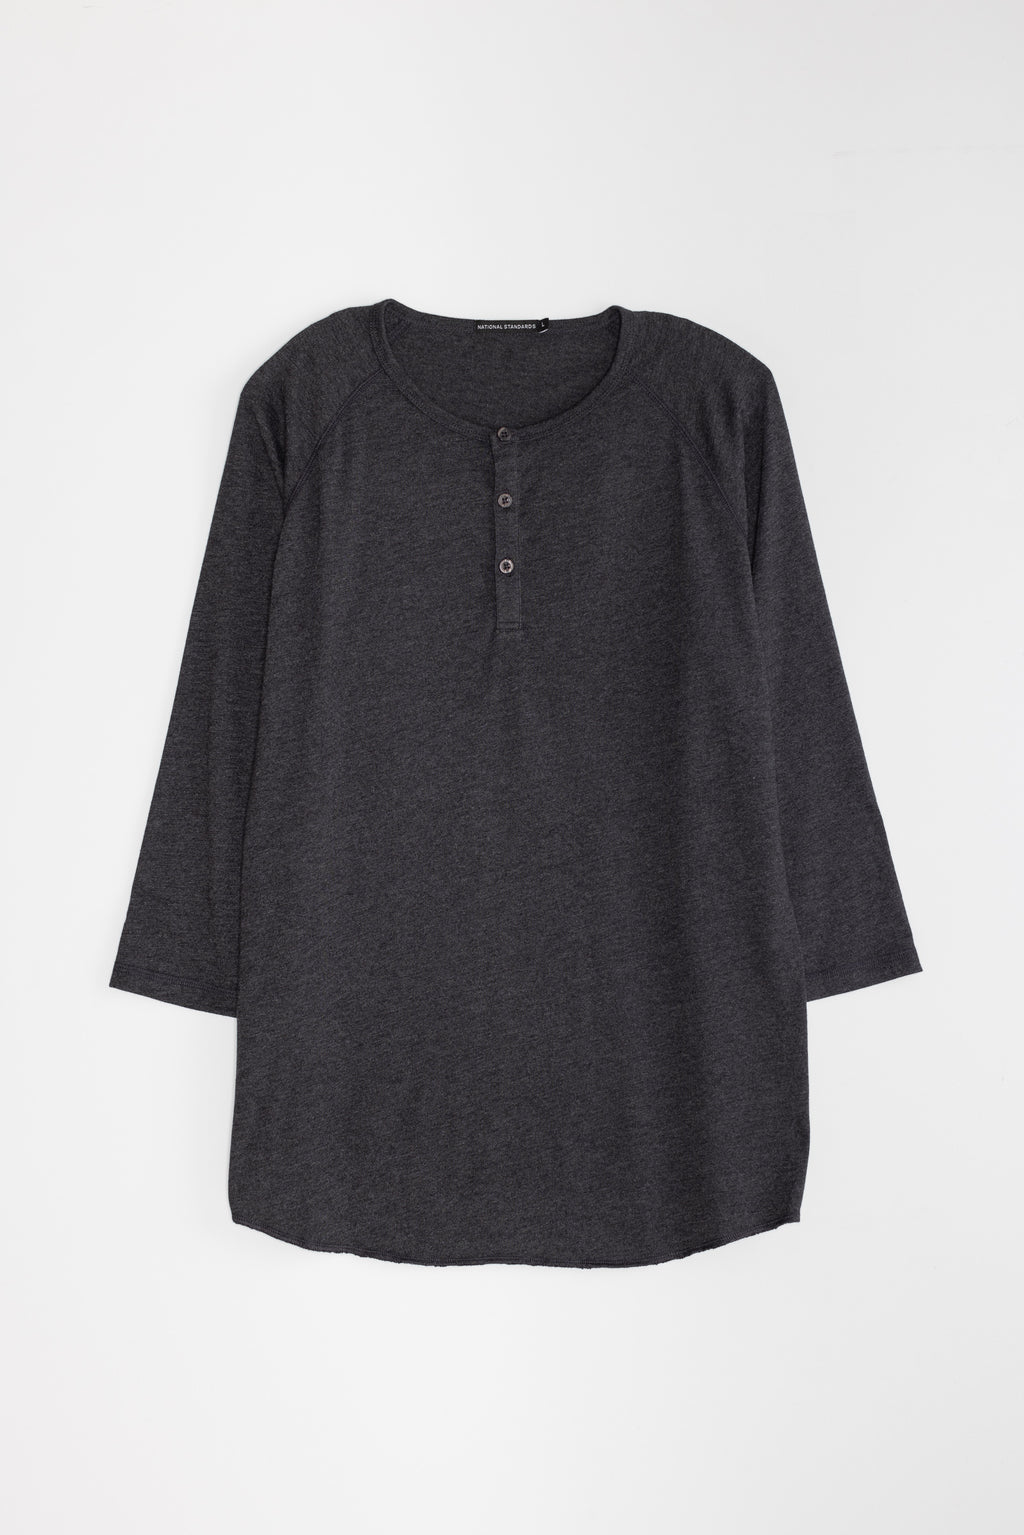 Tri Blend Henley in Charcoal 01